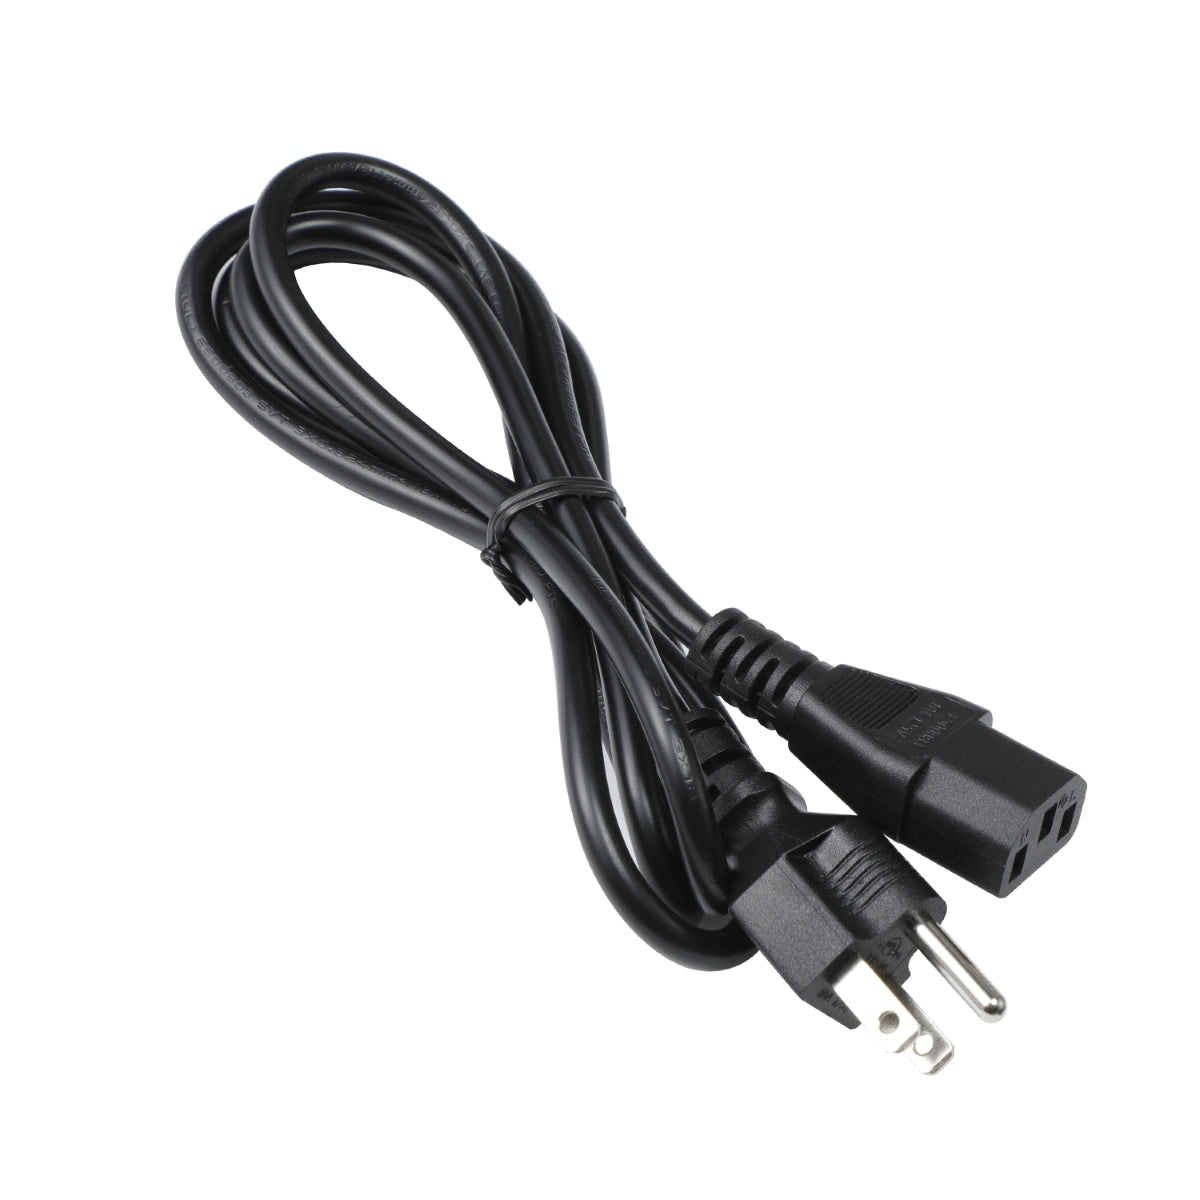 Power Cord for ViewSonic VP3881a Display